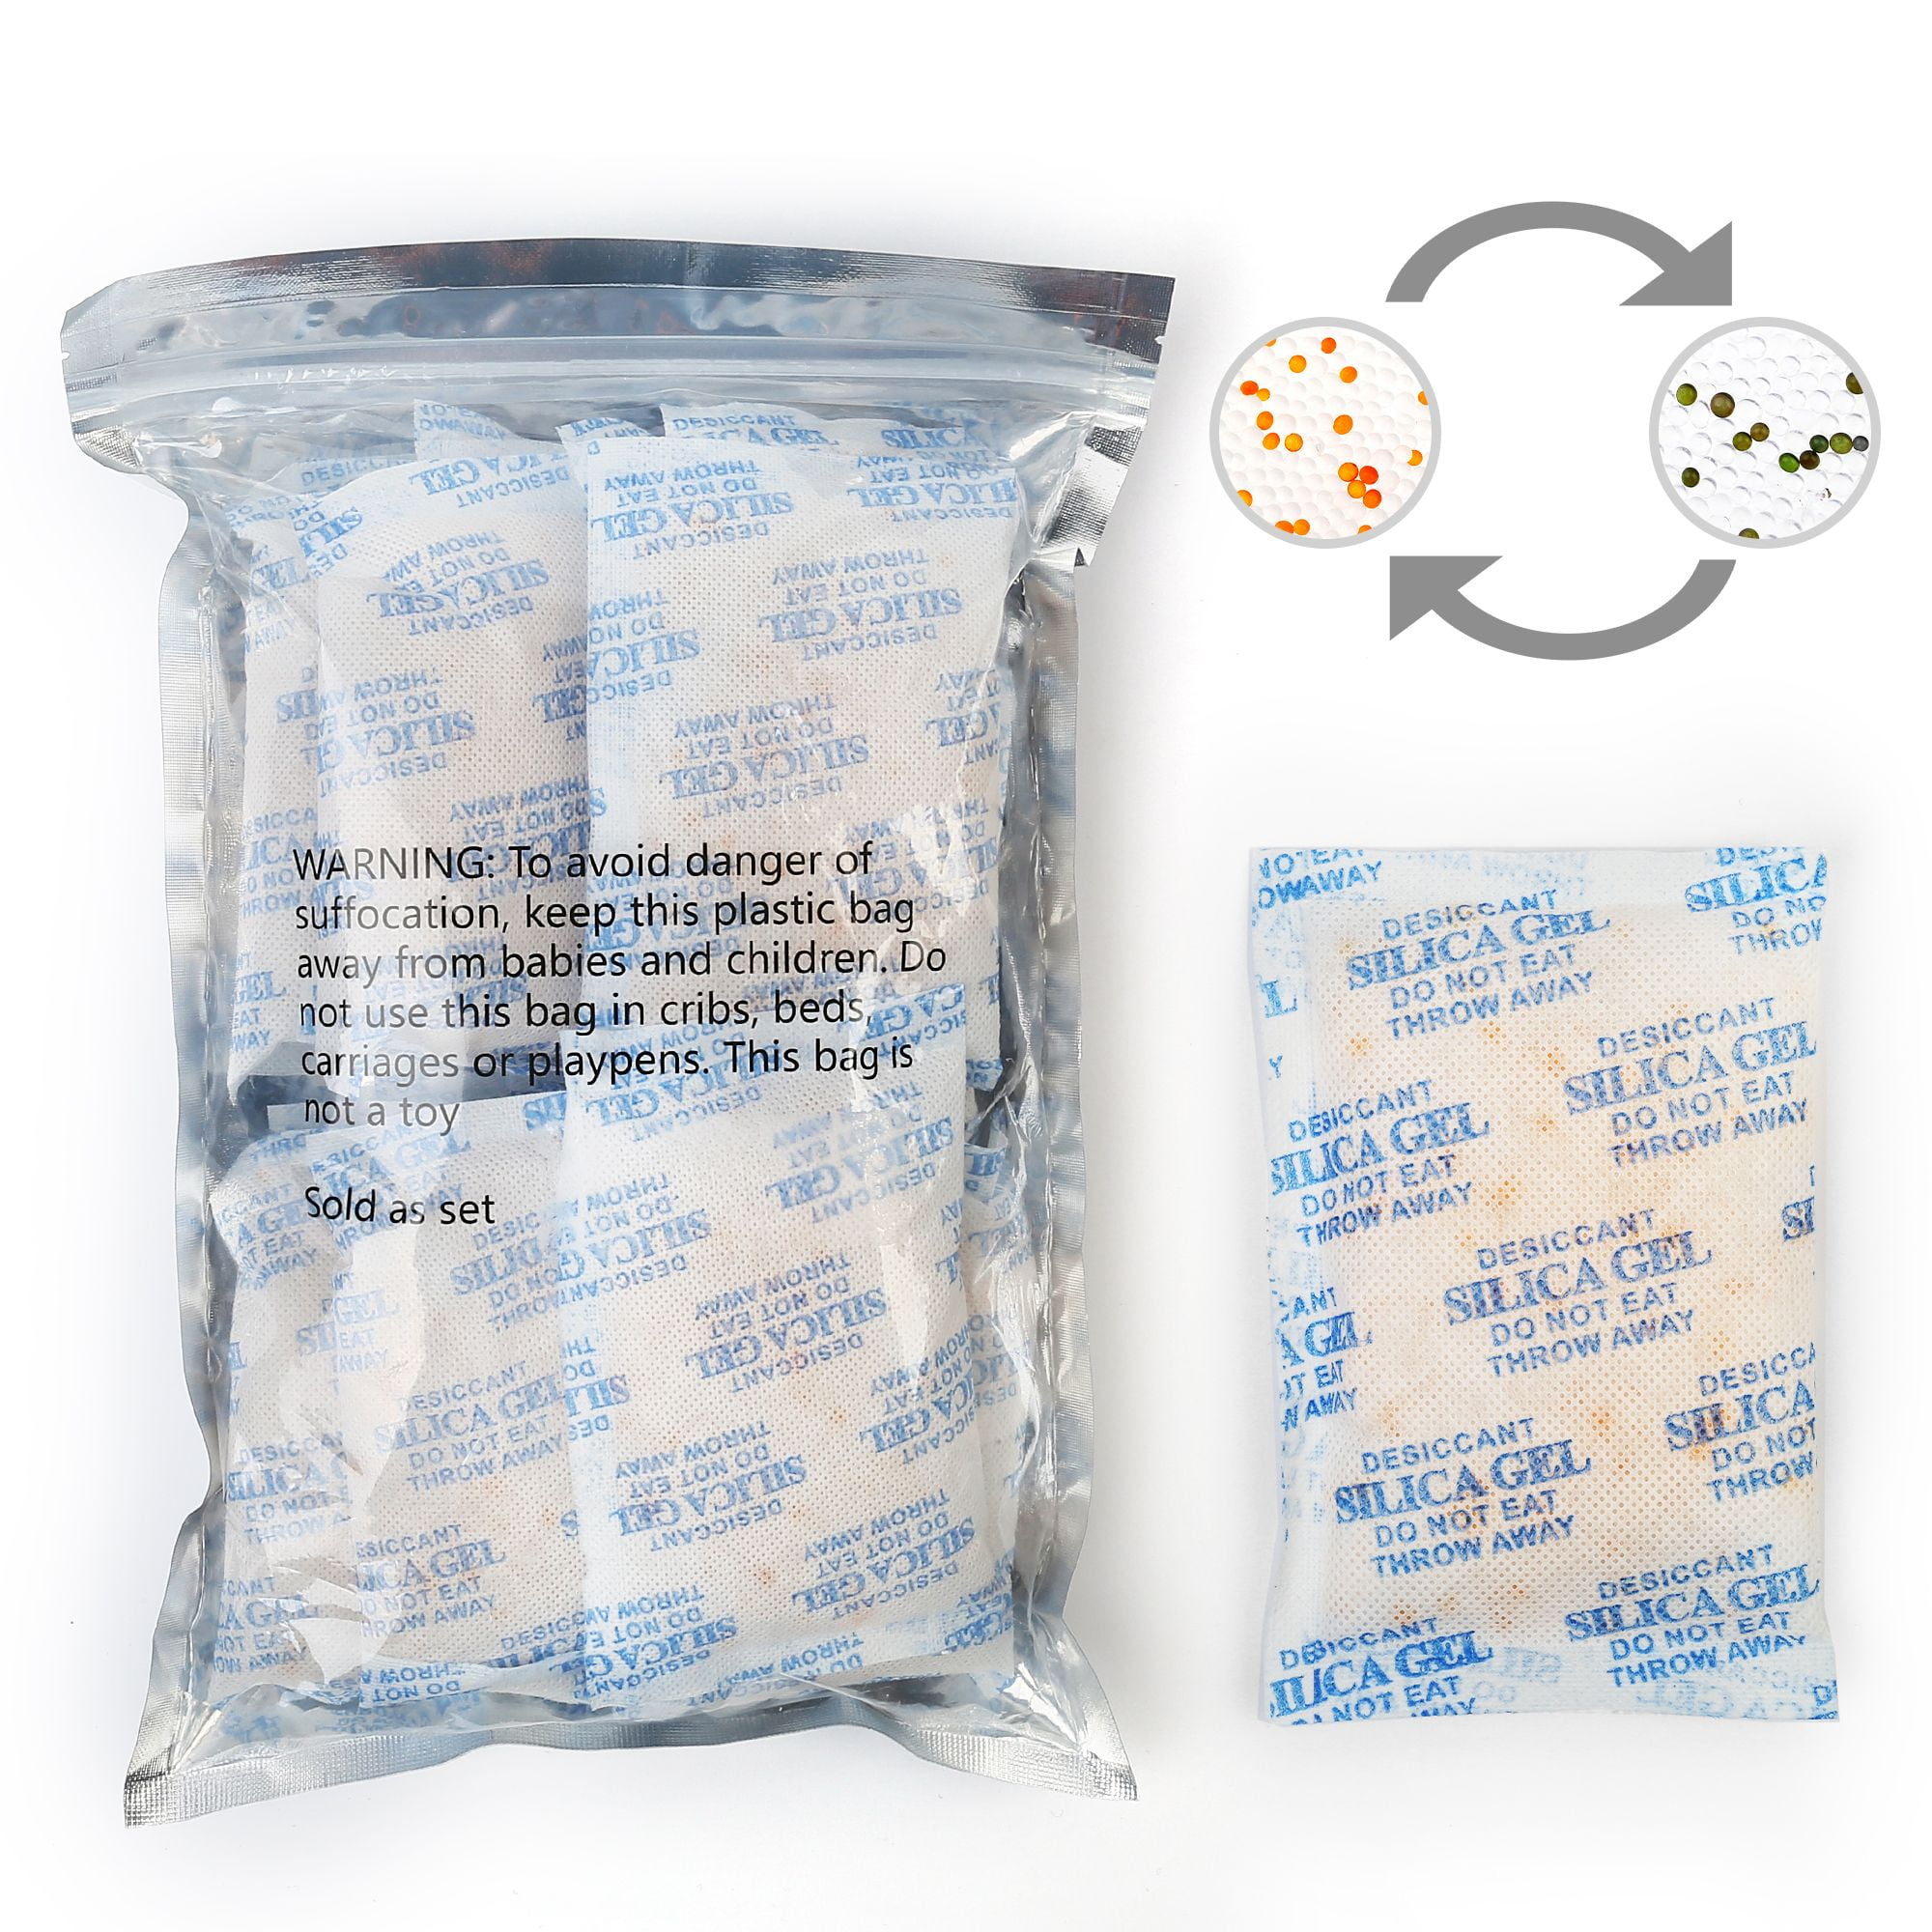 100 Silica Gel Packet 1/2 Gram Desiccant Currency Coin Storage Absorbs Moisture 